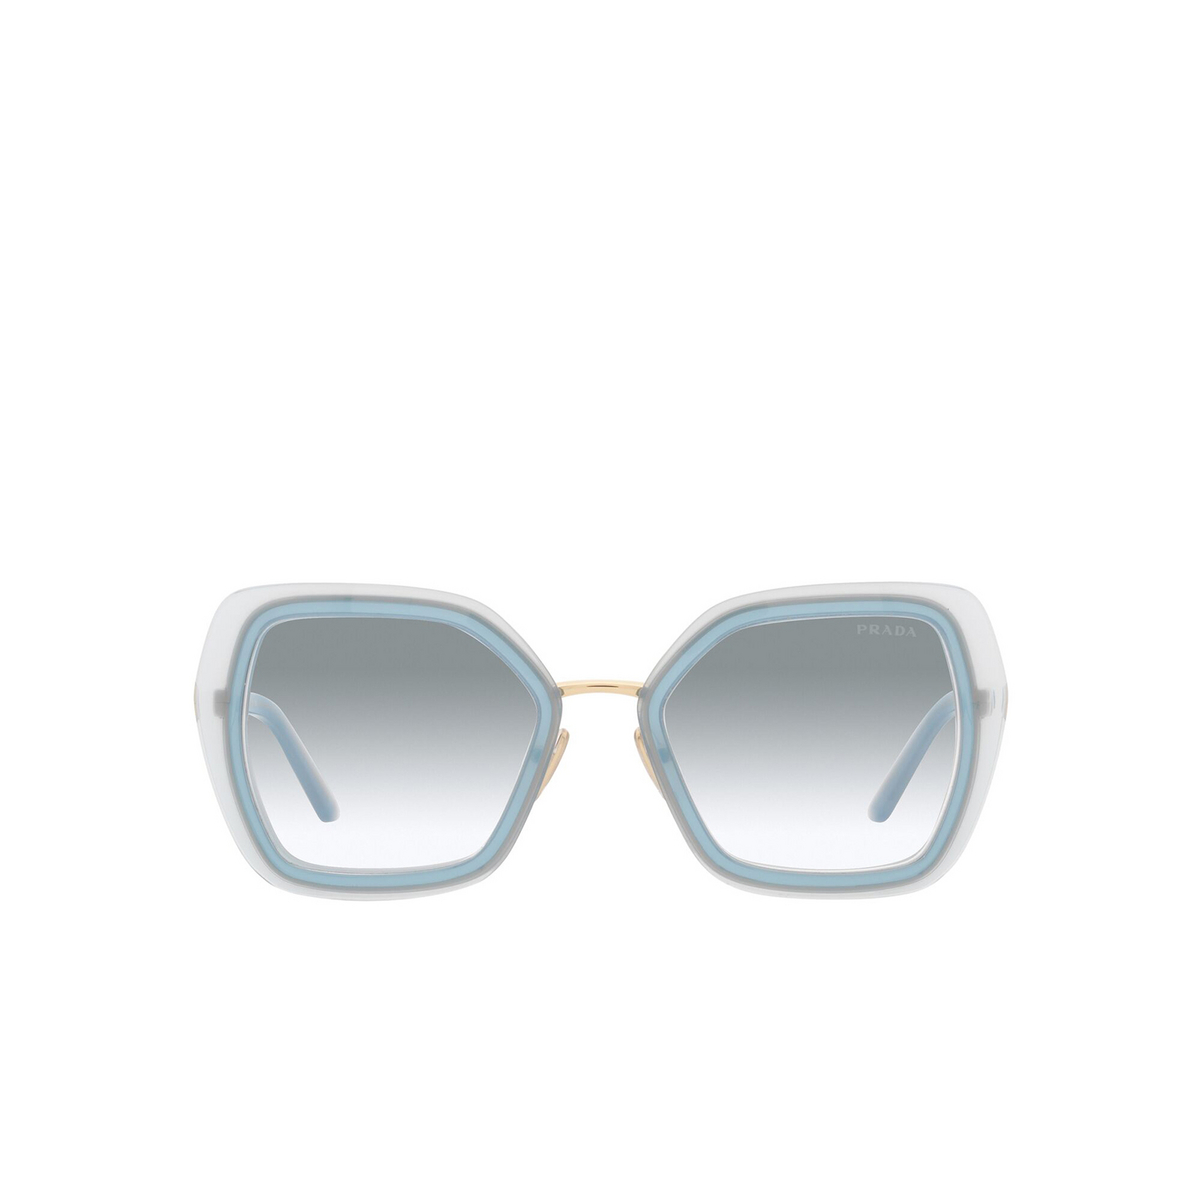 Prada® Butterfly Sunglasses: PR 53YS color Ceruleo Opal 06Y03O - front view.